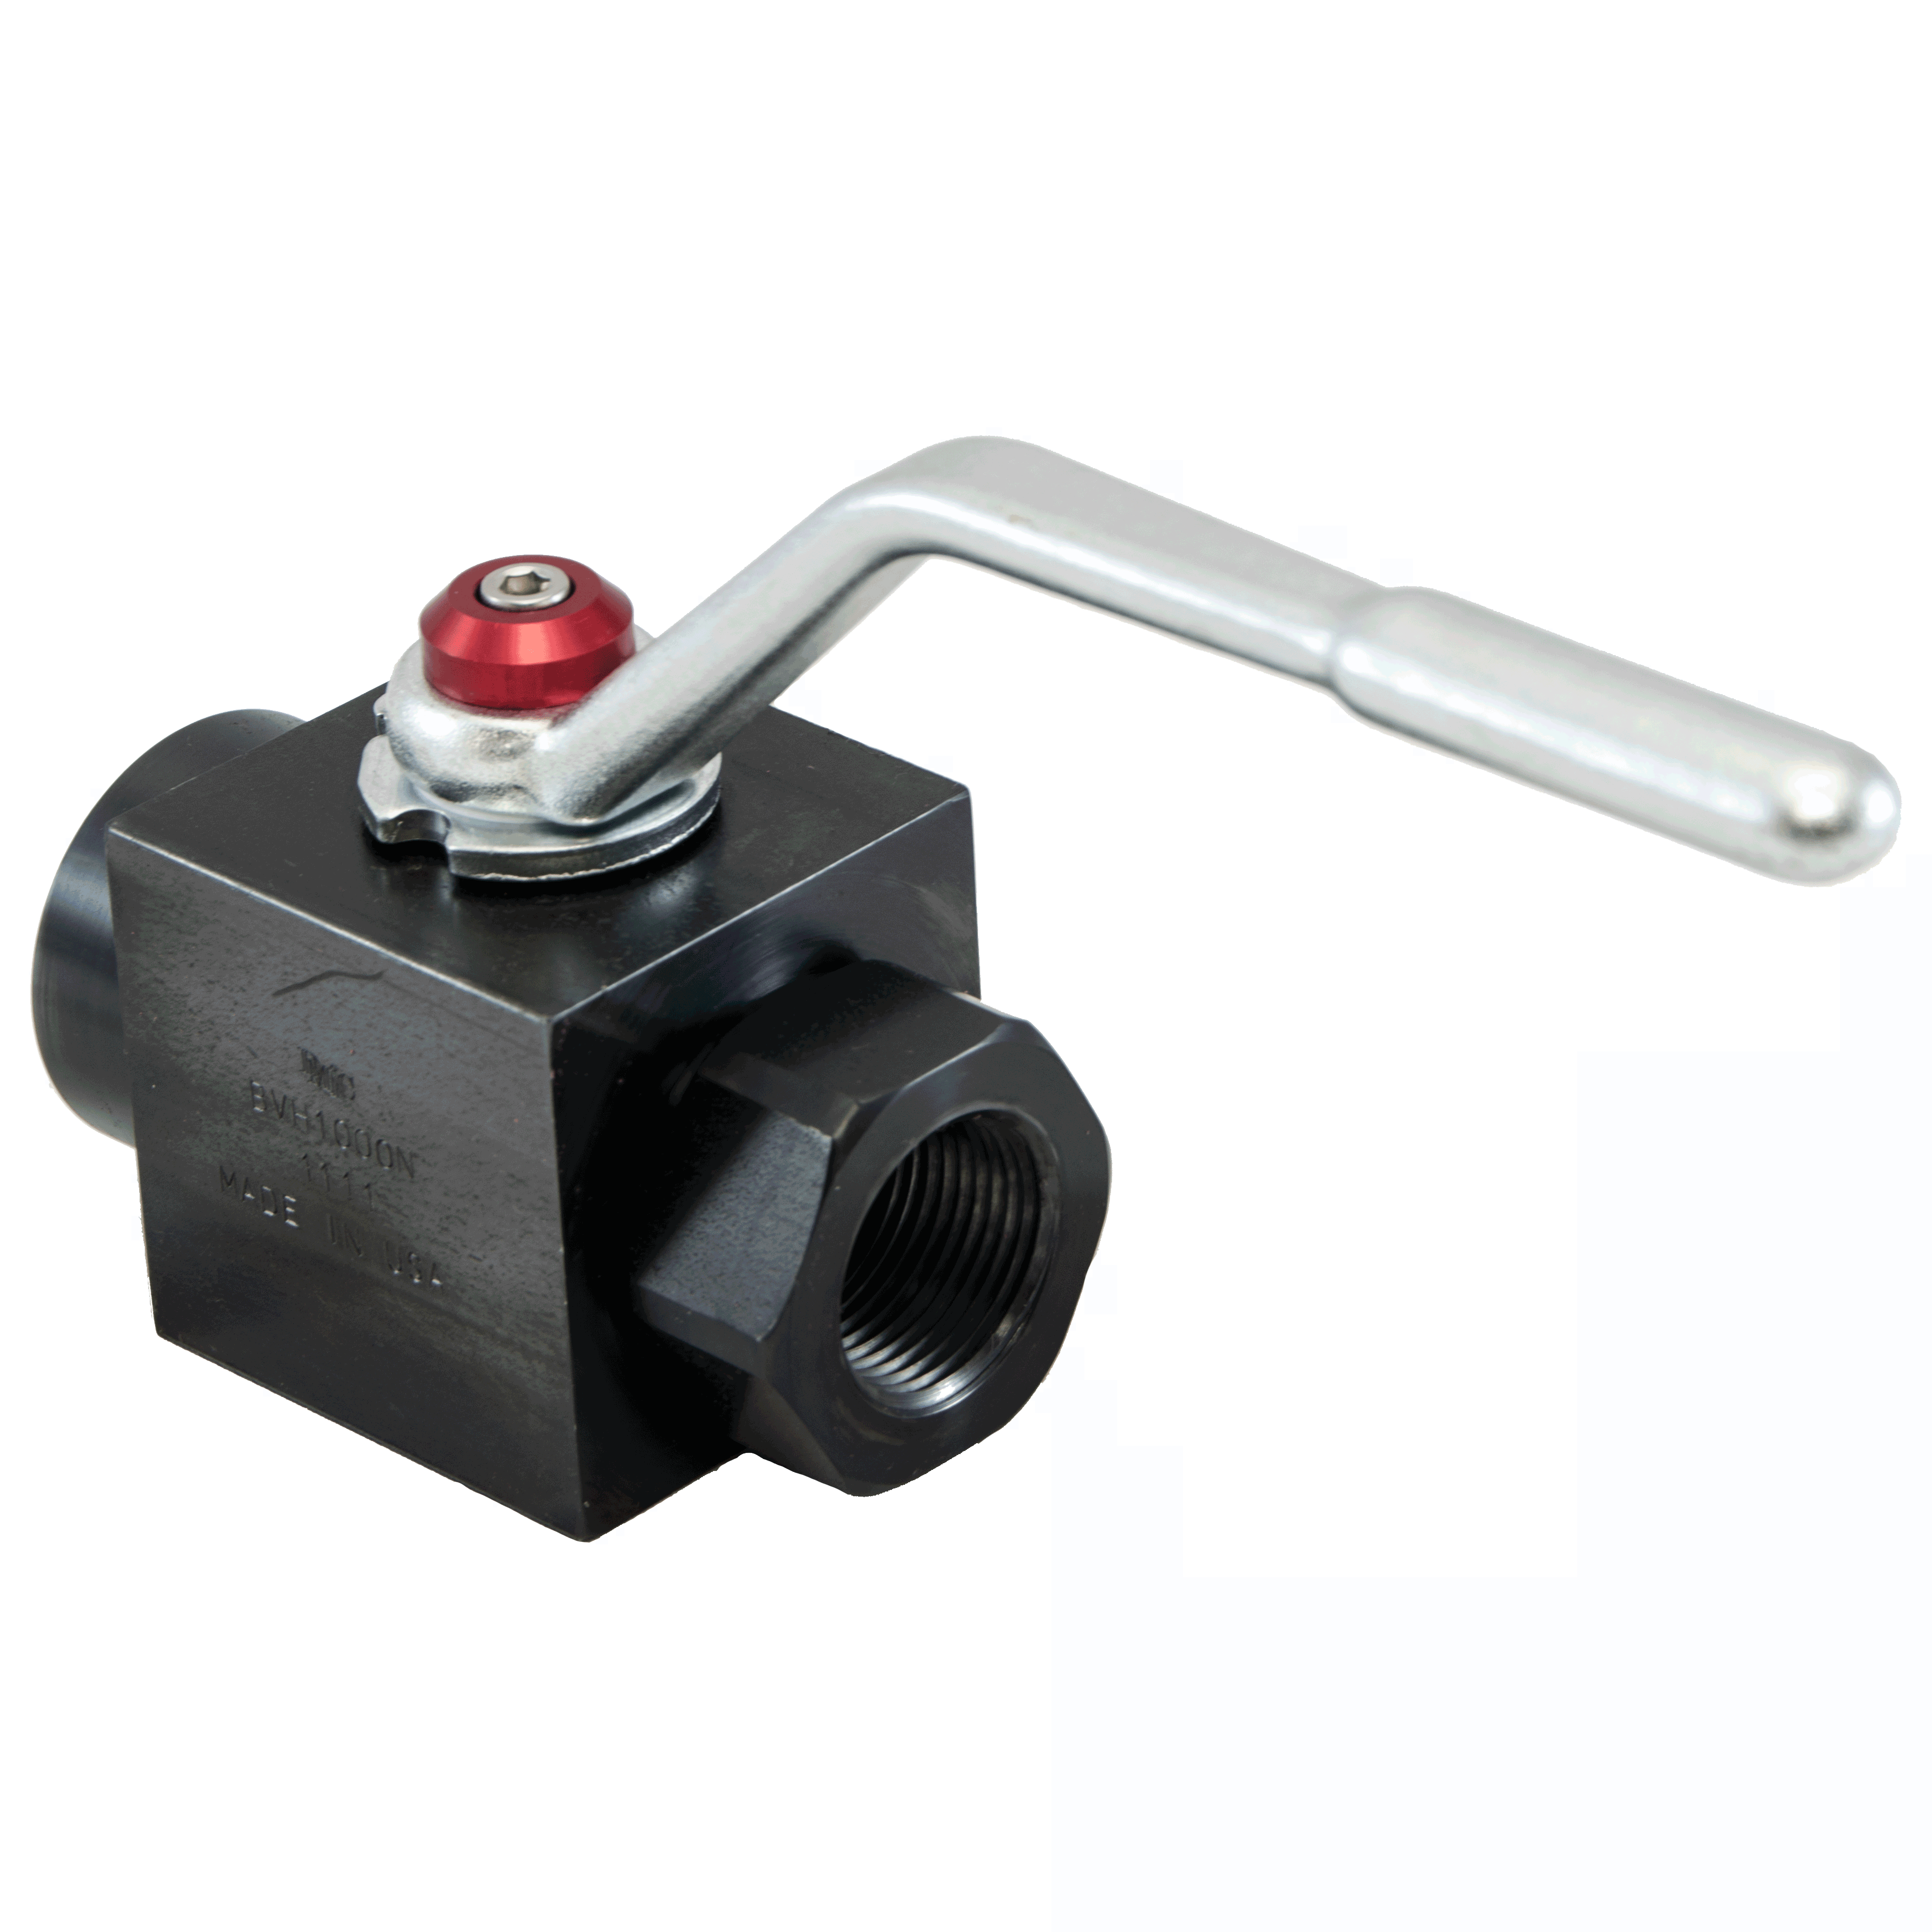 BVH-0375N-1111 : DMIC Square Body Ball Valve, 3/8 NPT, Carbon Steel, 7500psi, Two-Way